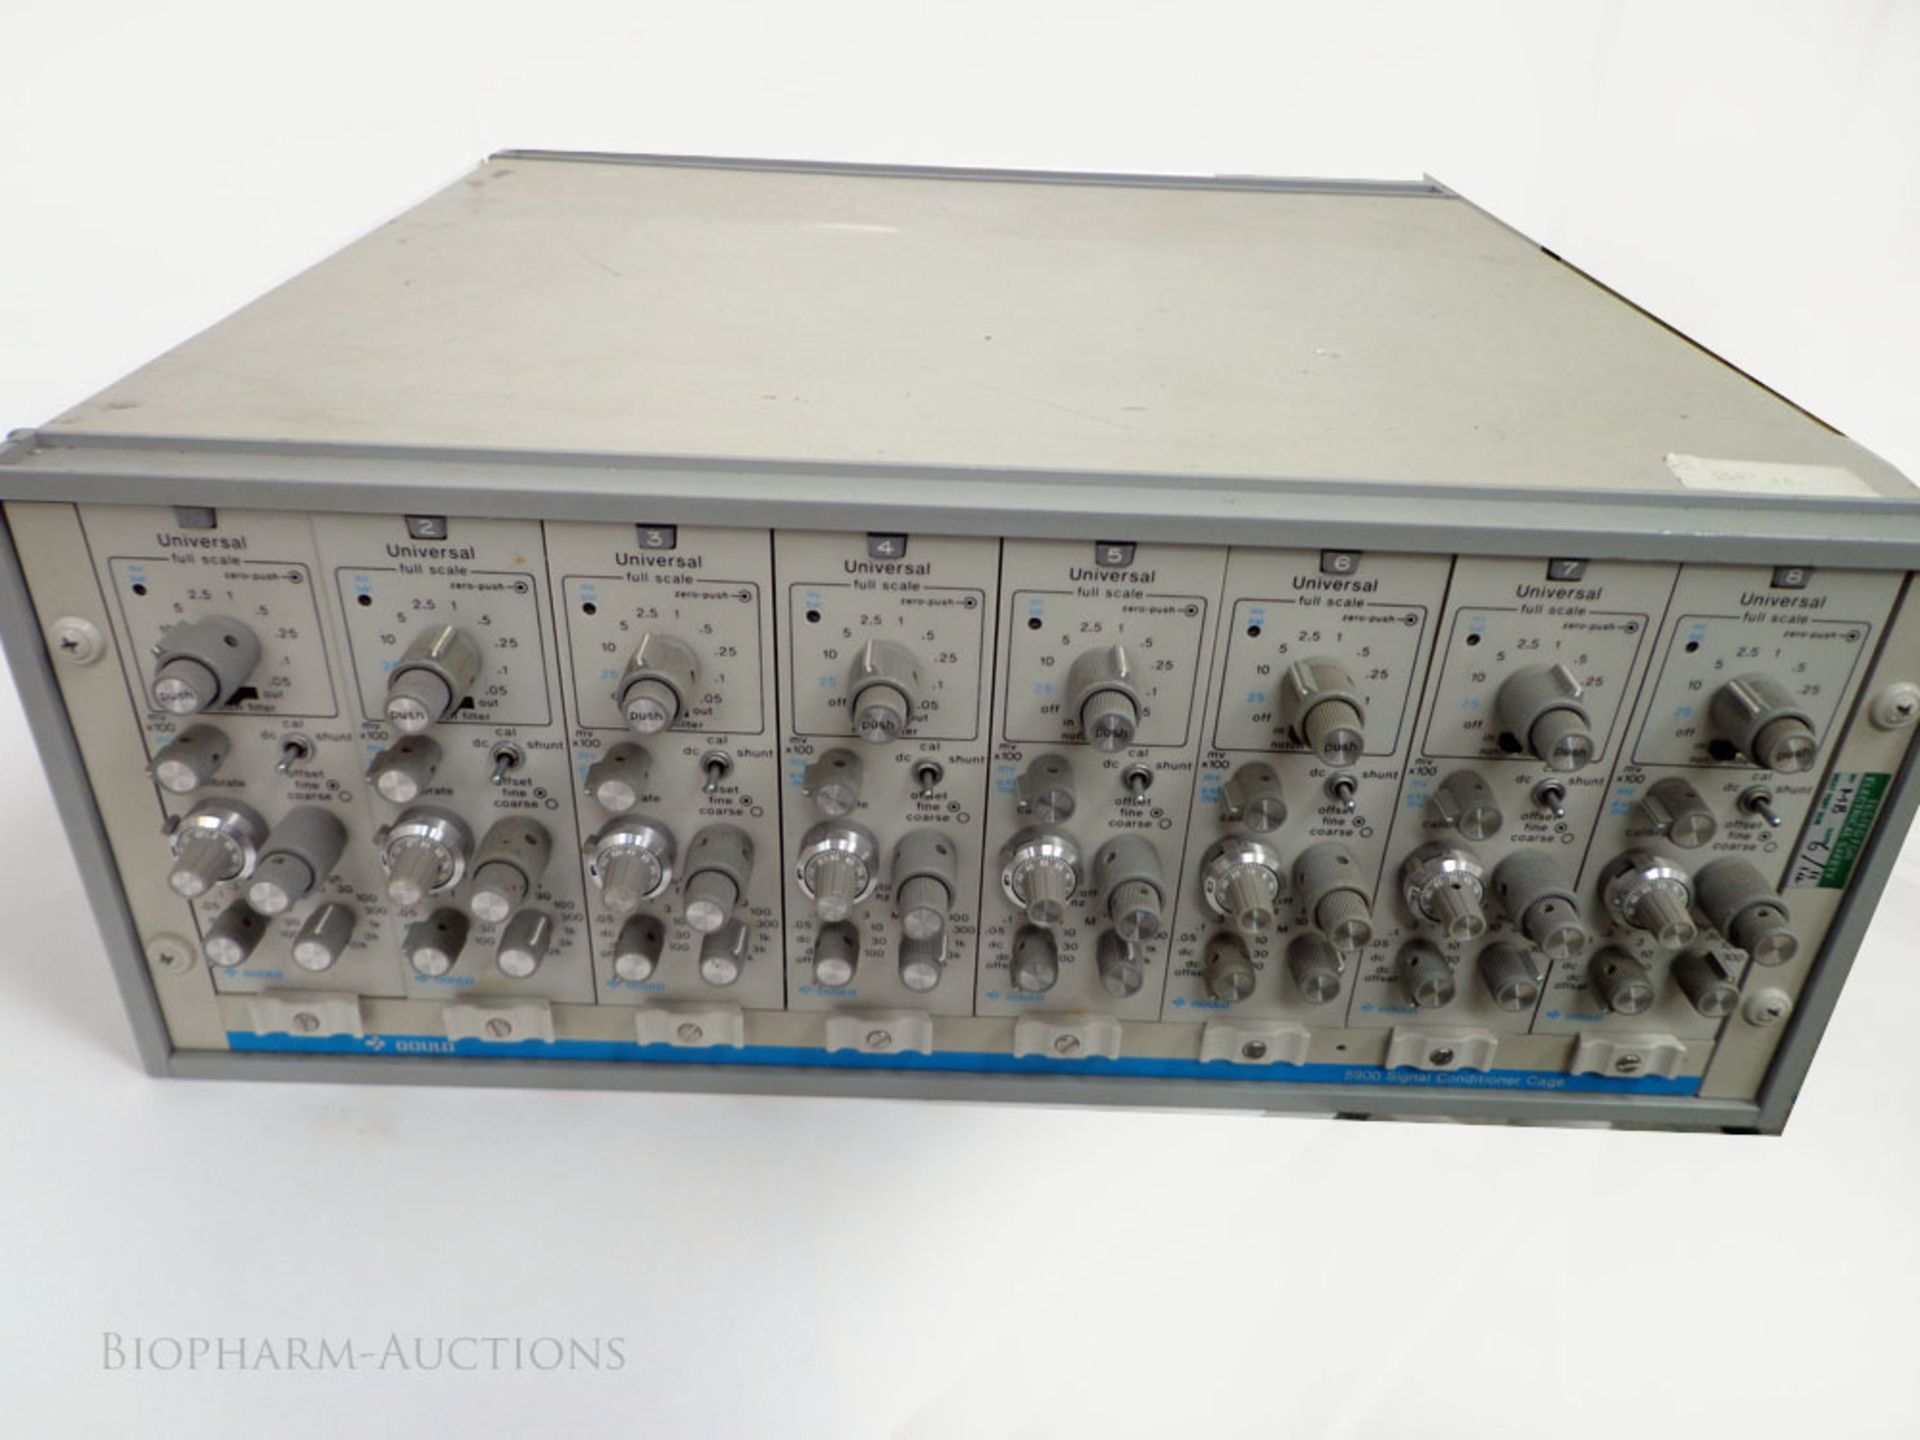 GOULD 5900 Signal Conditioner CageCL-810231-01, S/N 1040. - Image 2 of 3